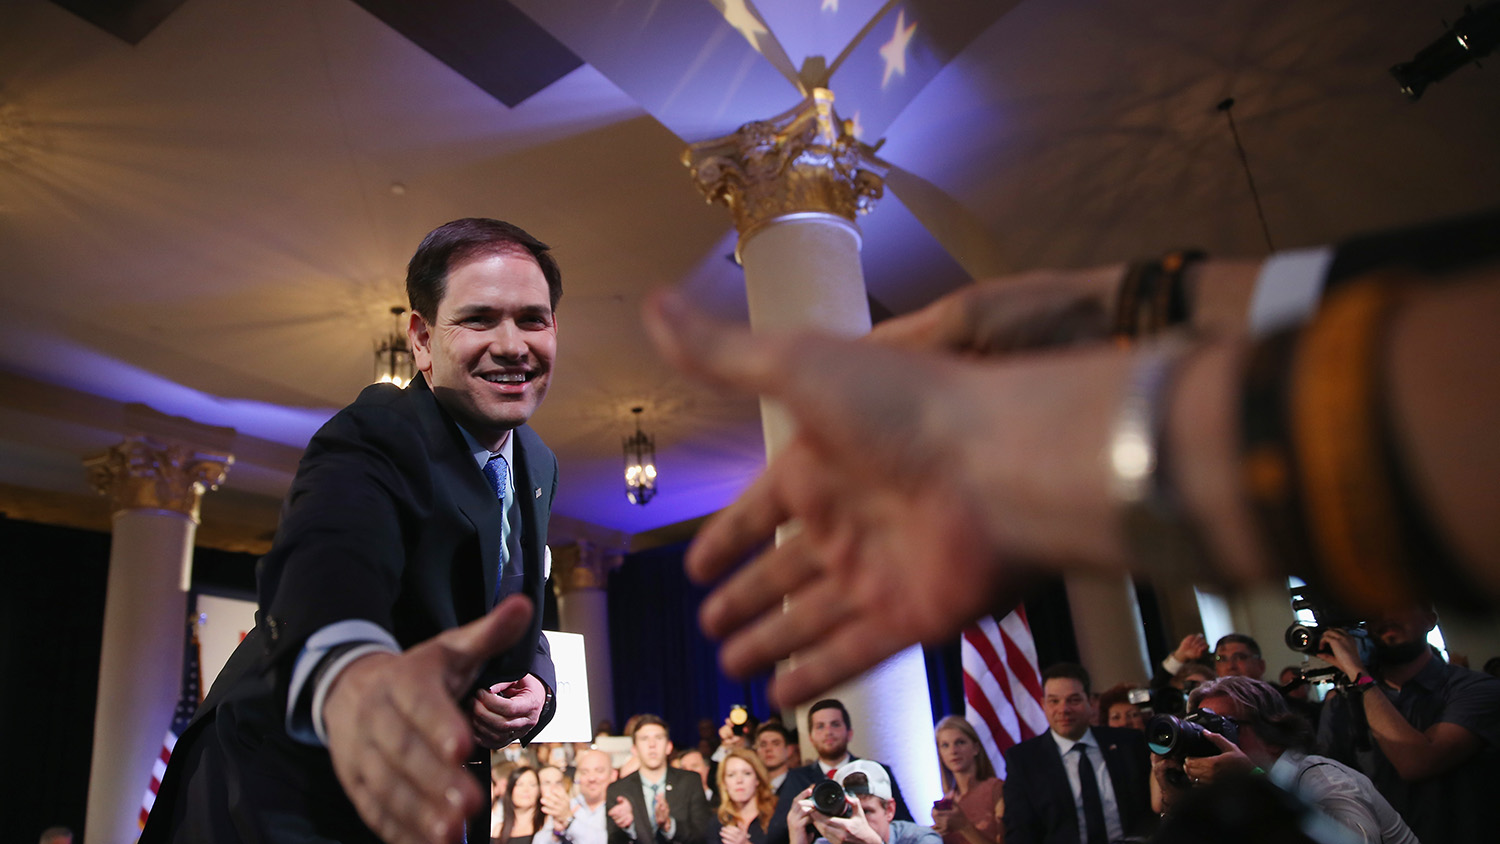 MIAMI, FL - APRIL 13: U.S. Sen. Marco Rubio (R-FL) greets people after anounncing his candidacy for the Republican presidential nomination during an event at the Freedom Tower on April 13, 2015 in Miami, Florida. Rubio is one of three Republican candidates to announce their plans on running against the Democratic challenger for the White House.
